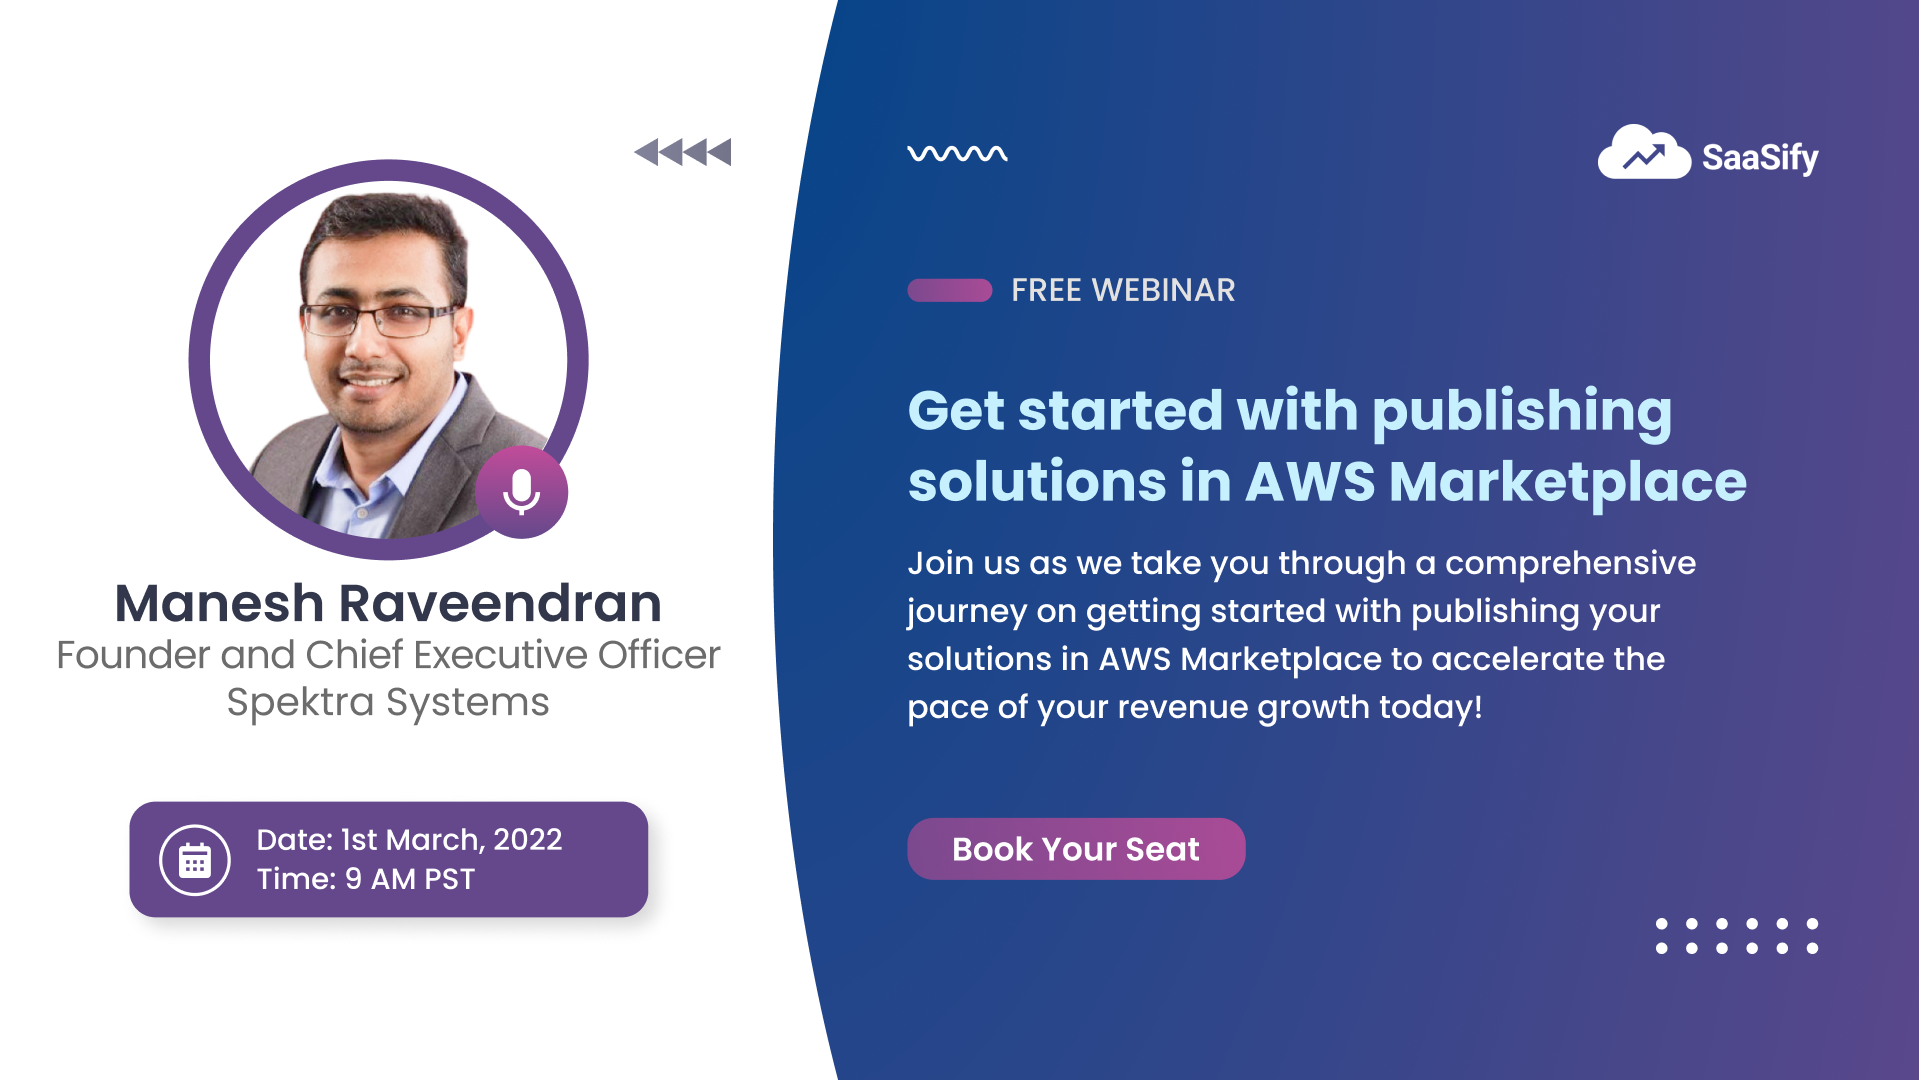 Get started with publishing solutions in AWS Marketplace: Top Learnings for ISVs